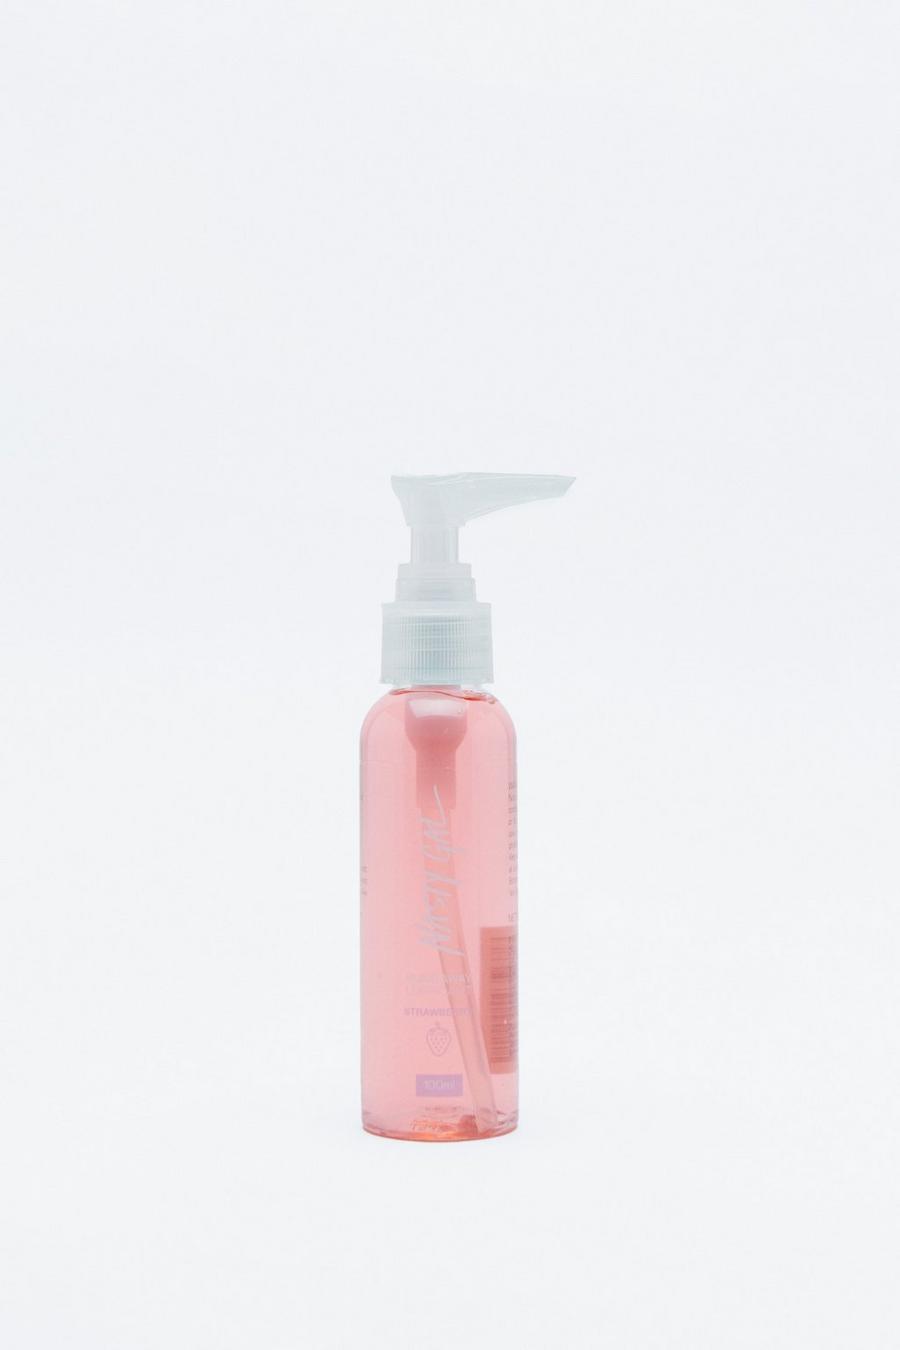 Strawberry Flavoured Lube 100ml